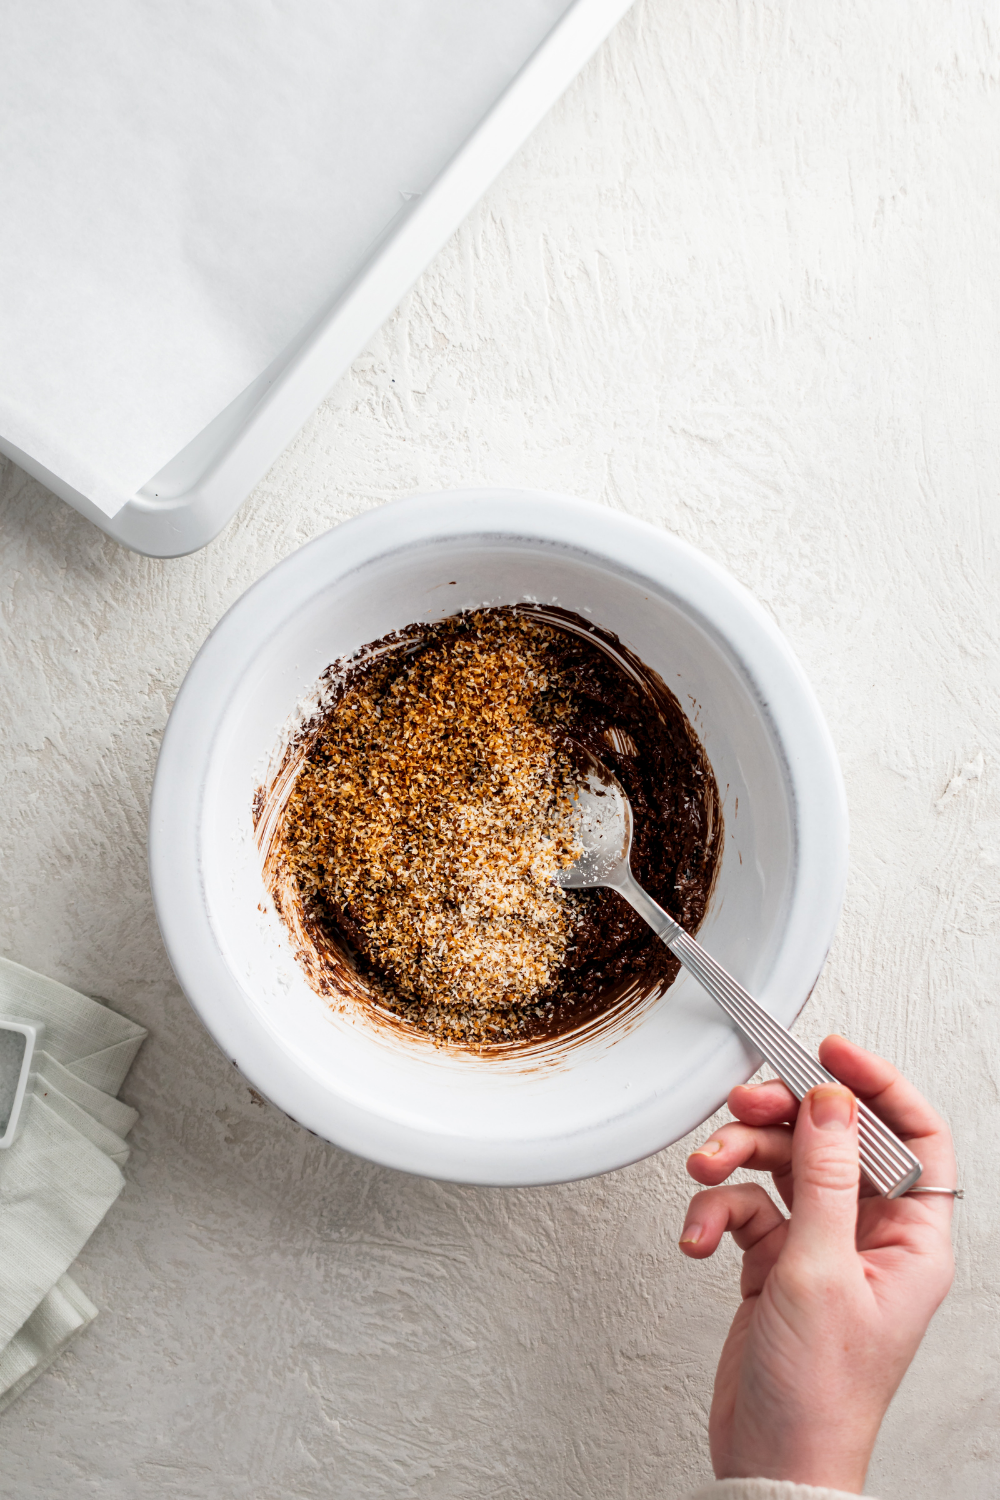 A hand holding a spoon in a bowl that has toasted coconut flakes and melted chocolate.